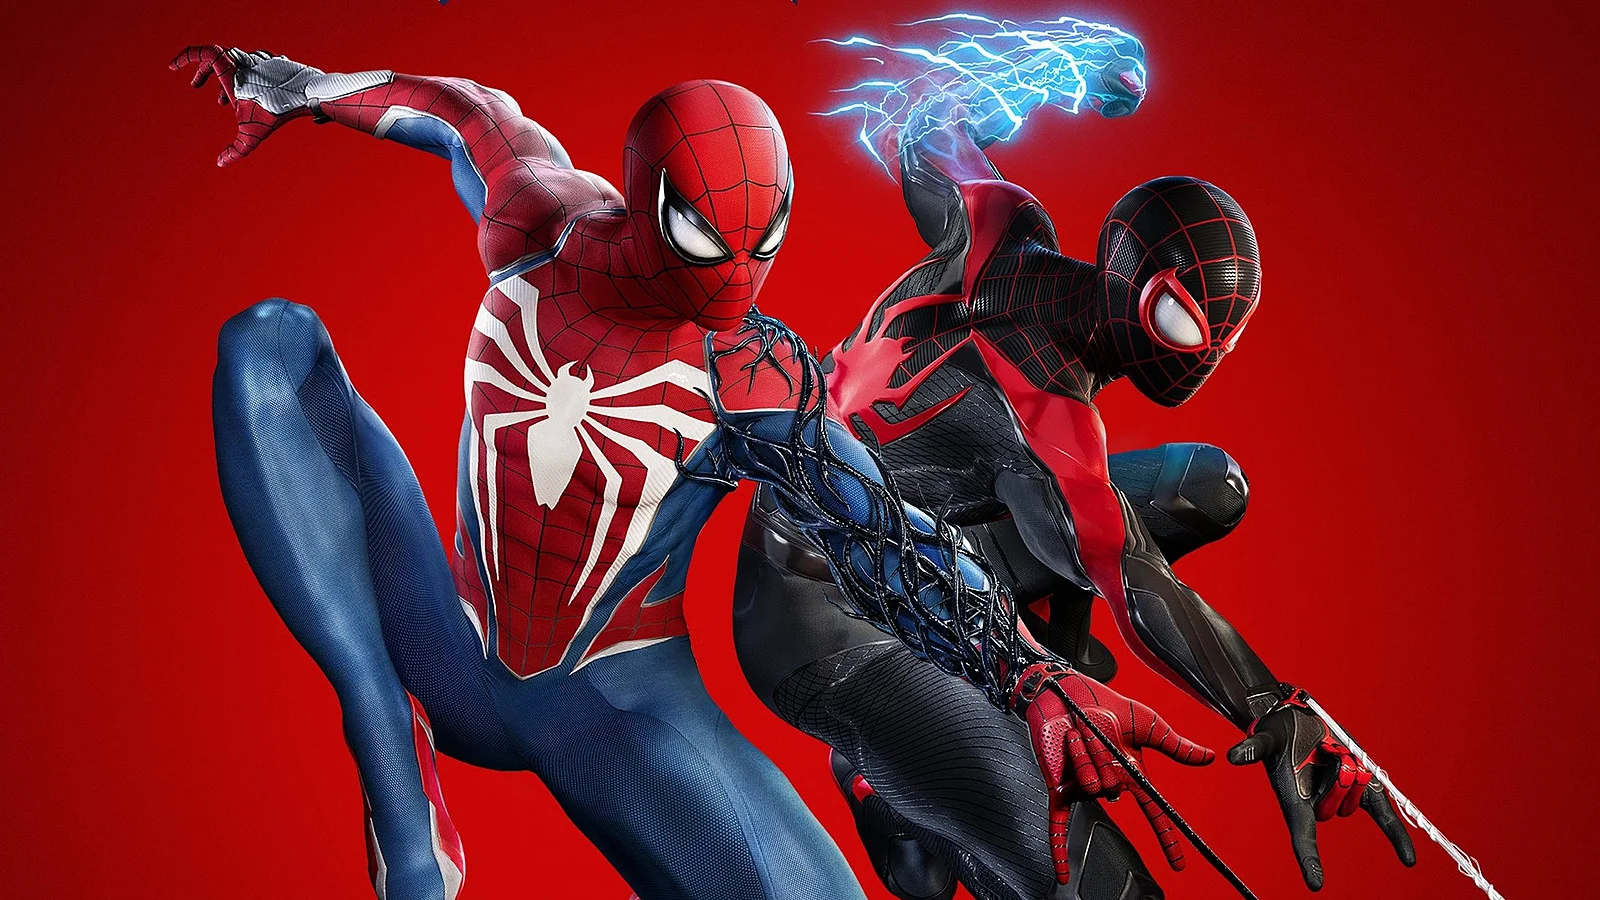 Marvel's Spider-Man 2 was presented at the Summer Game Fest event. The release date and composition of each edition of the game have become known